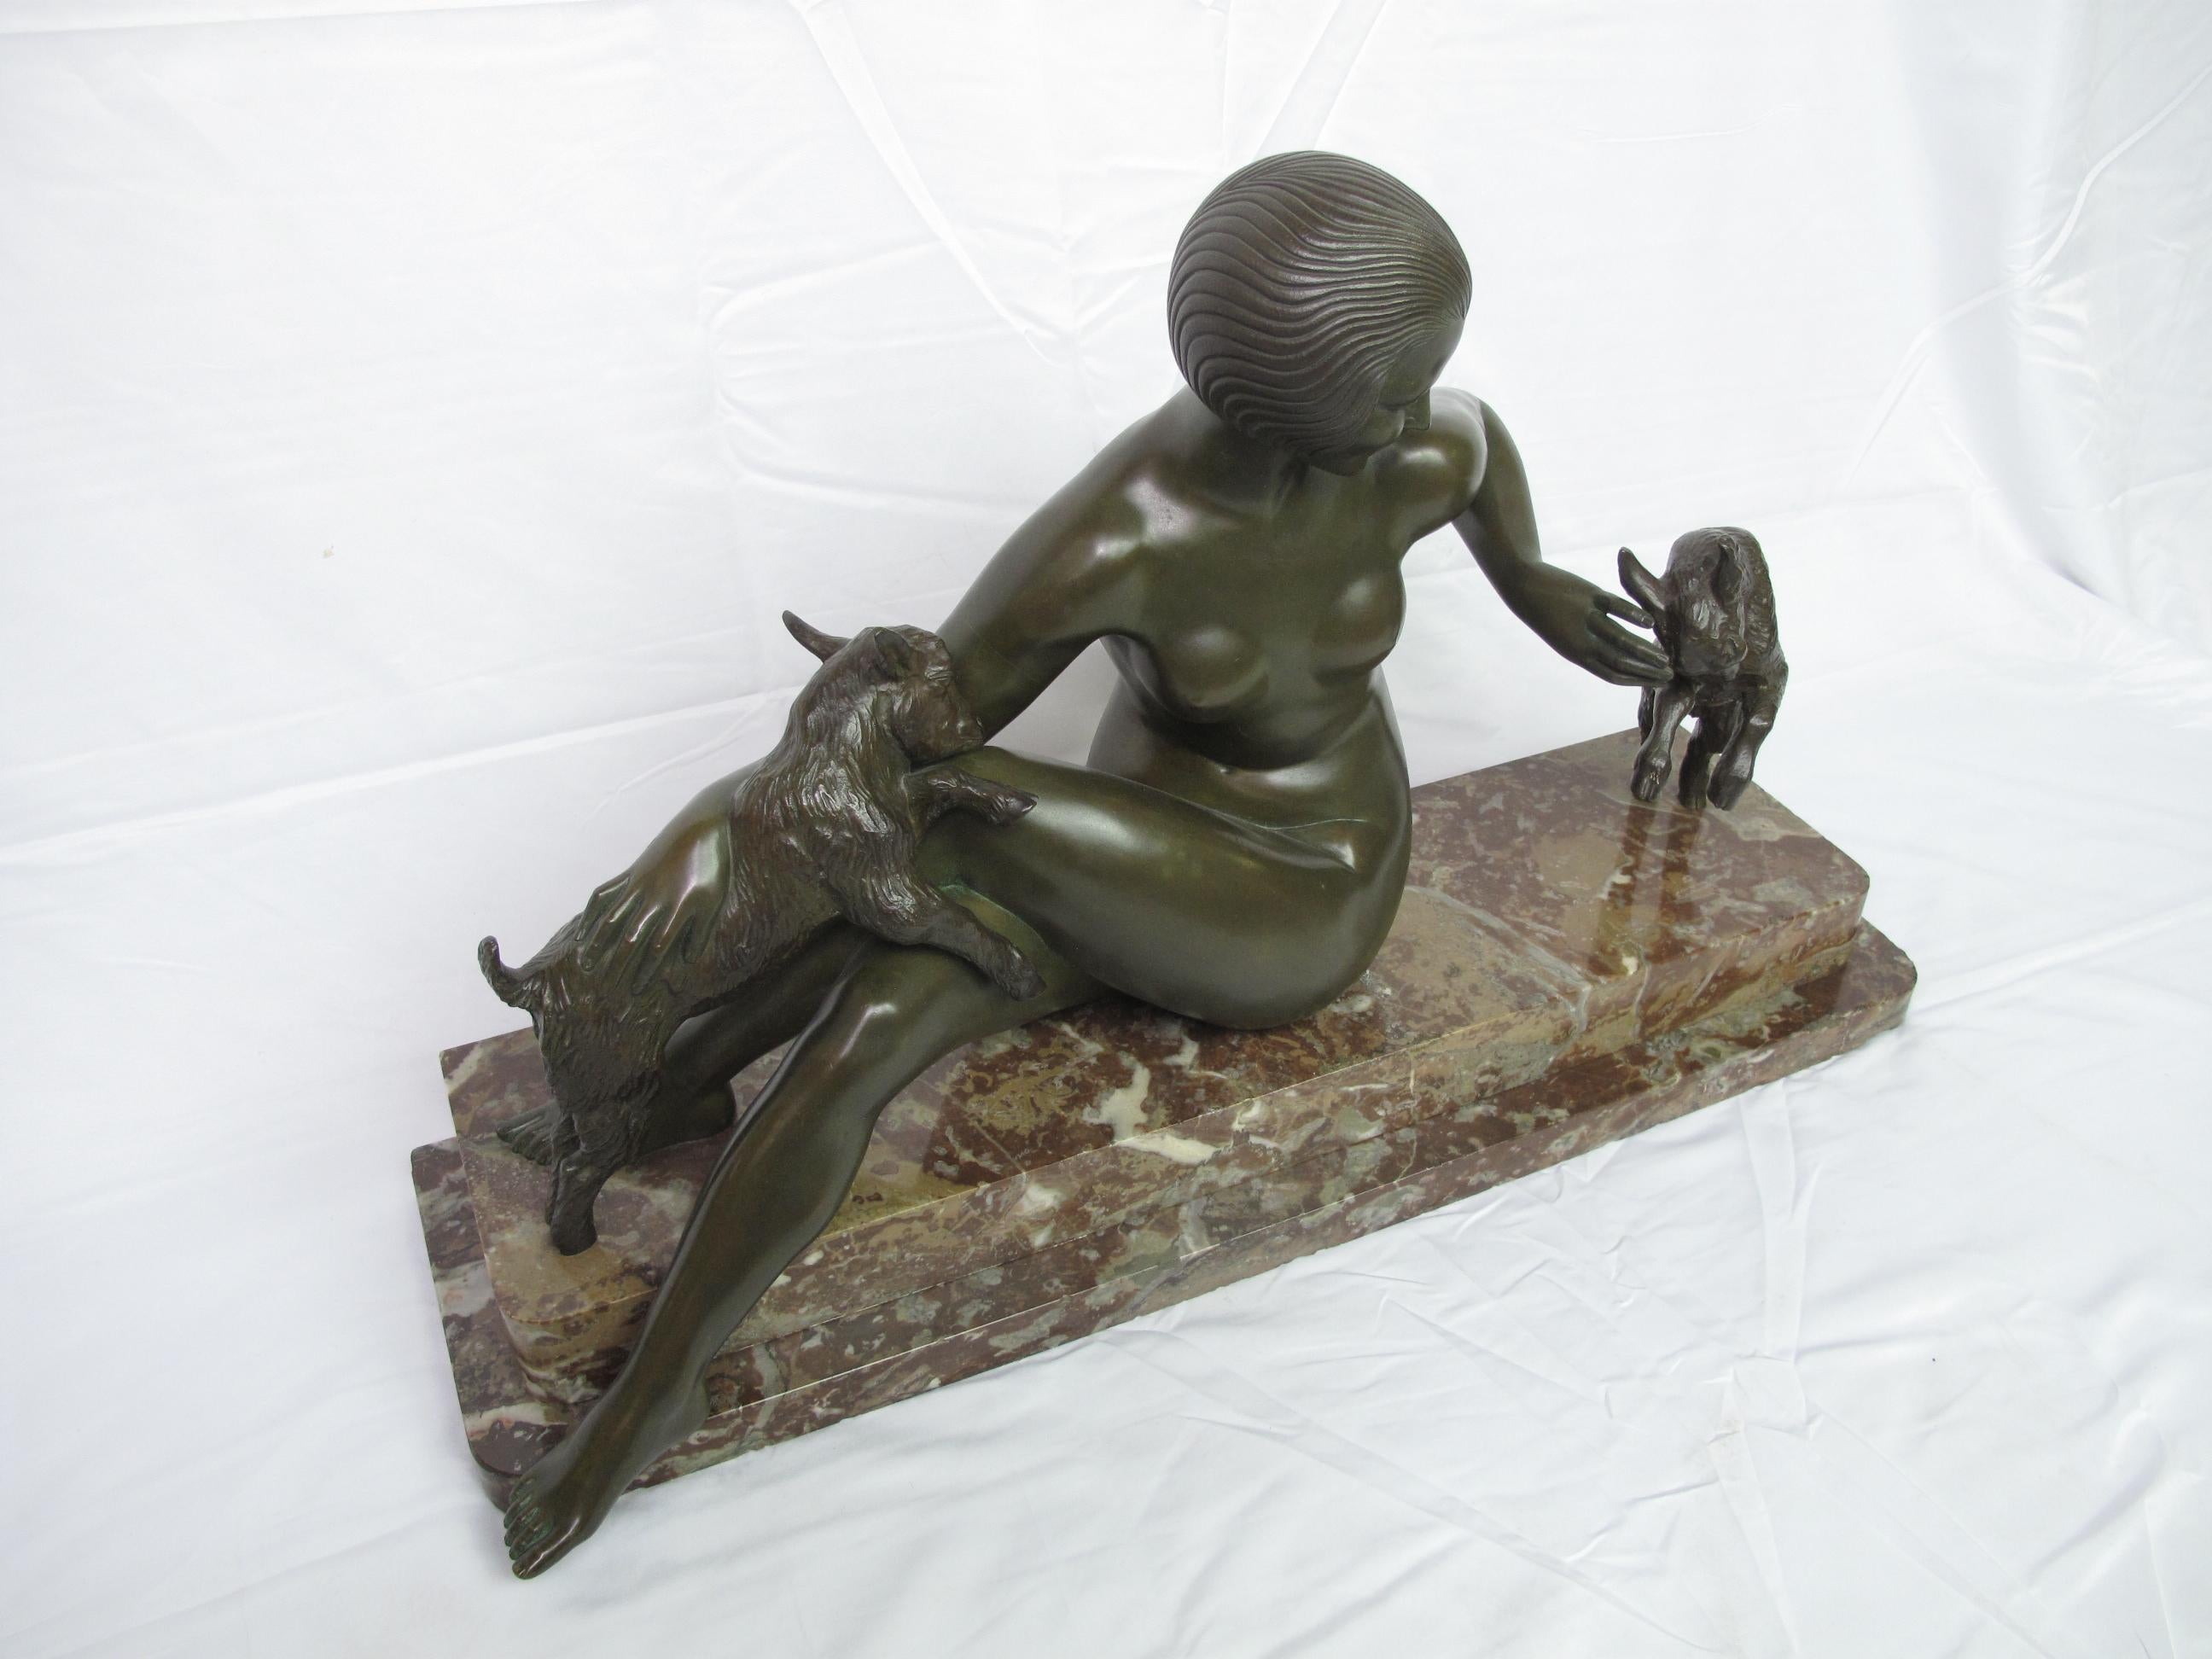 Art Deco bronze sculpture by Maurice Guiraud-Riviere (French, 1881-1947). A scarce untitled work often called woman with goats or 